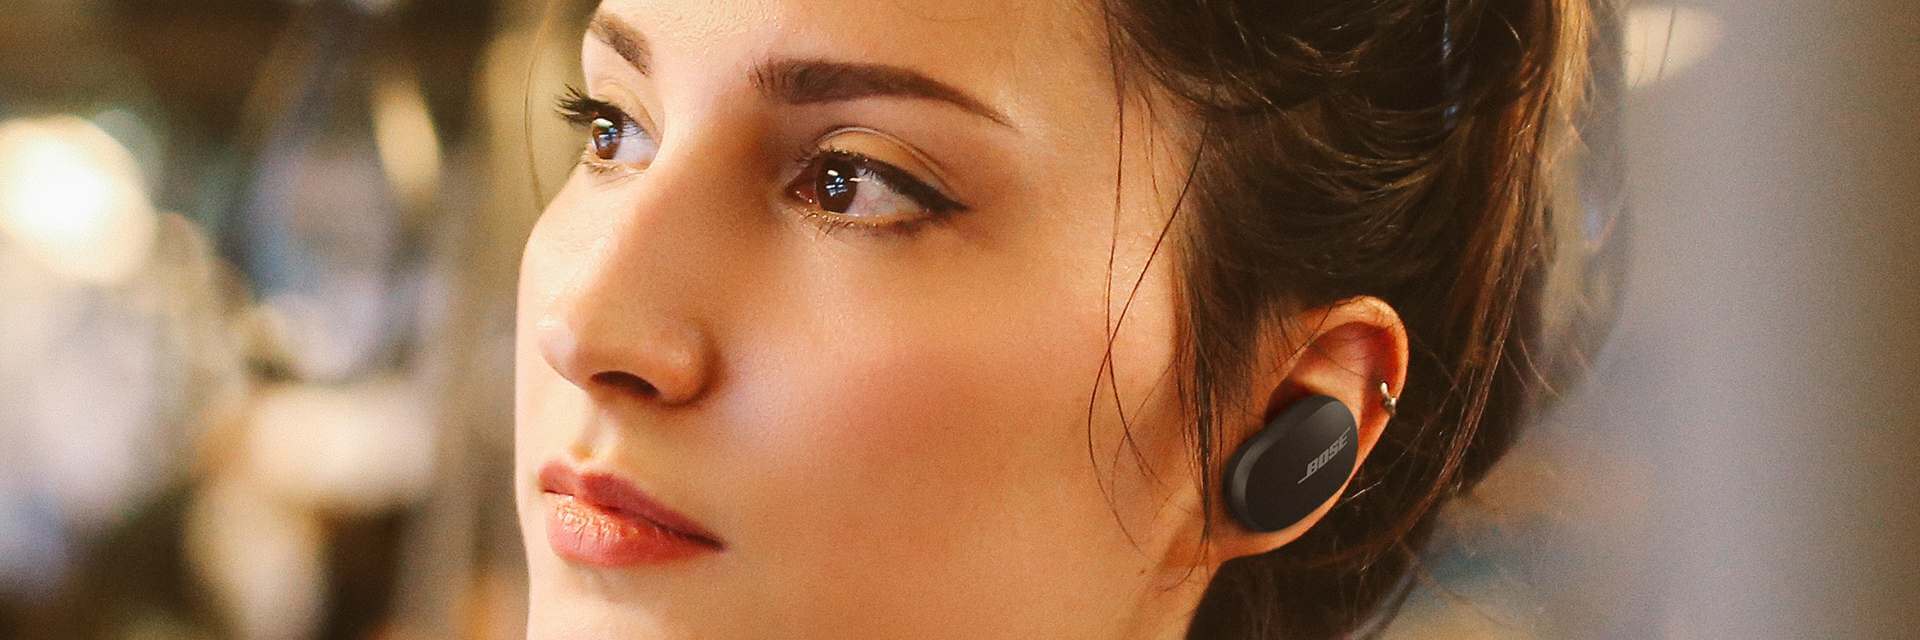 side view of a woman wearing an earbud